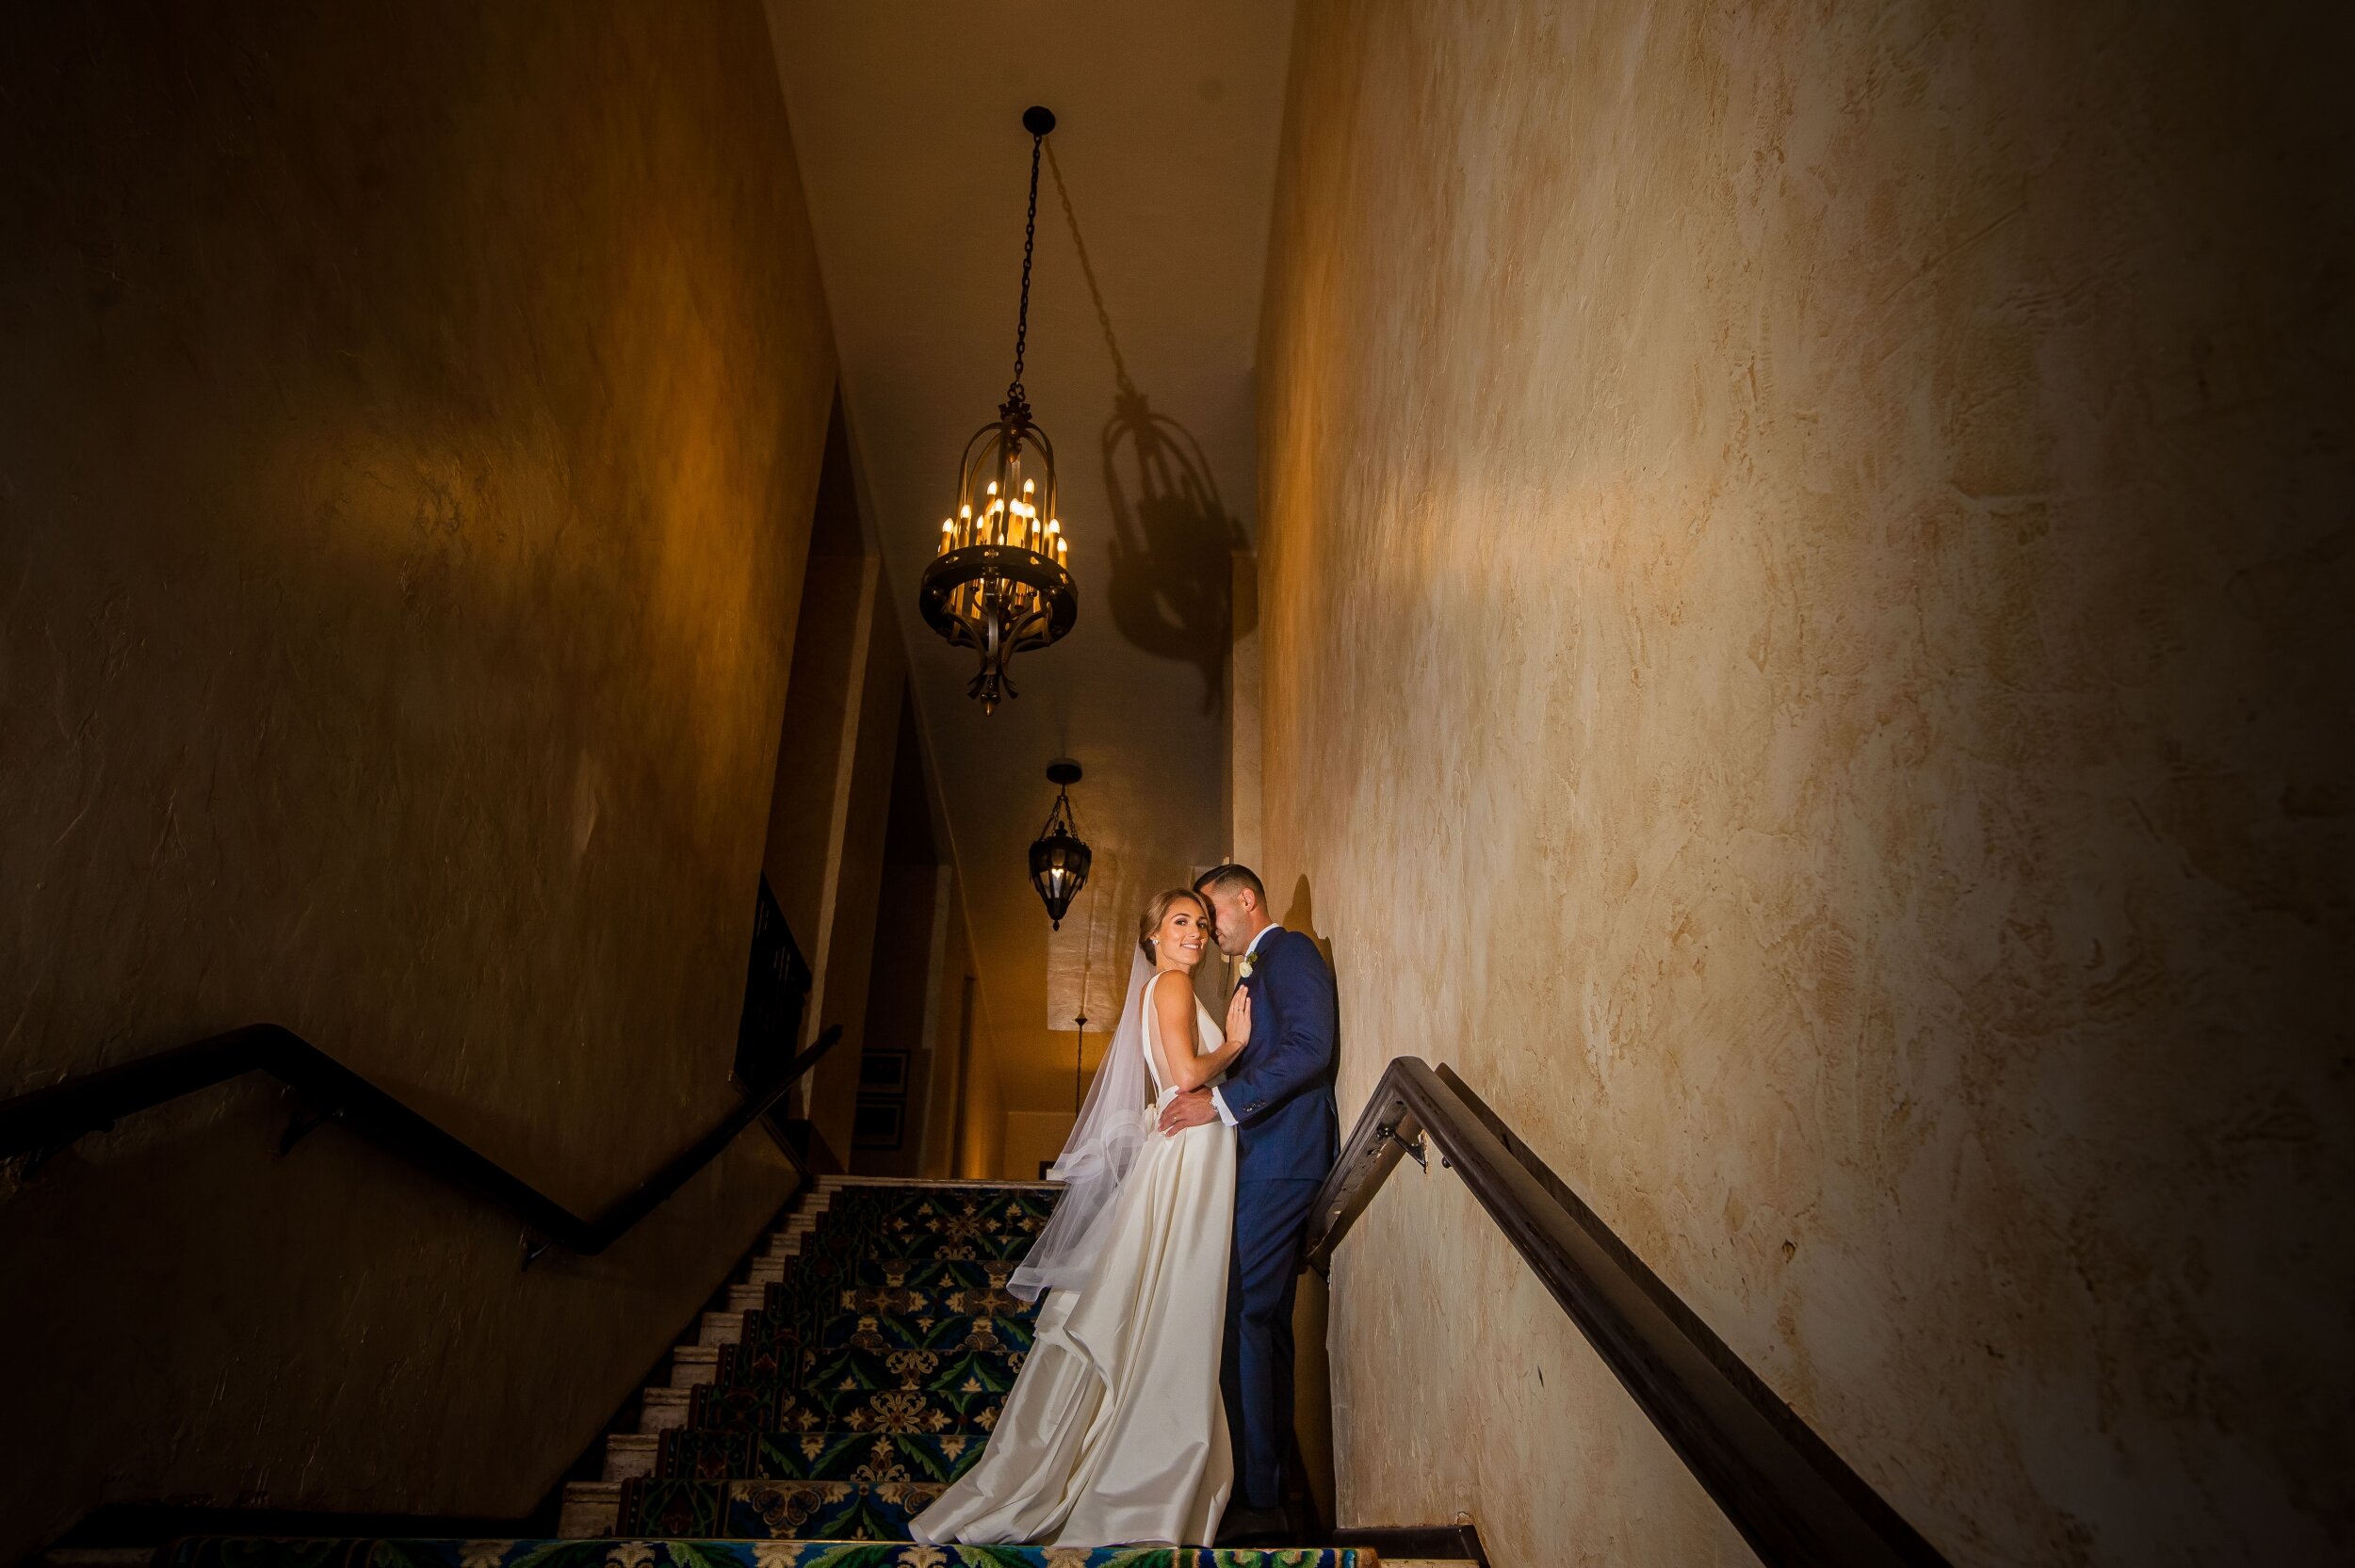 Biltmore Coral Gables - Church of the Little Flower - Wedding - Photography by Santy Martinez 15.jpg